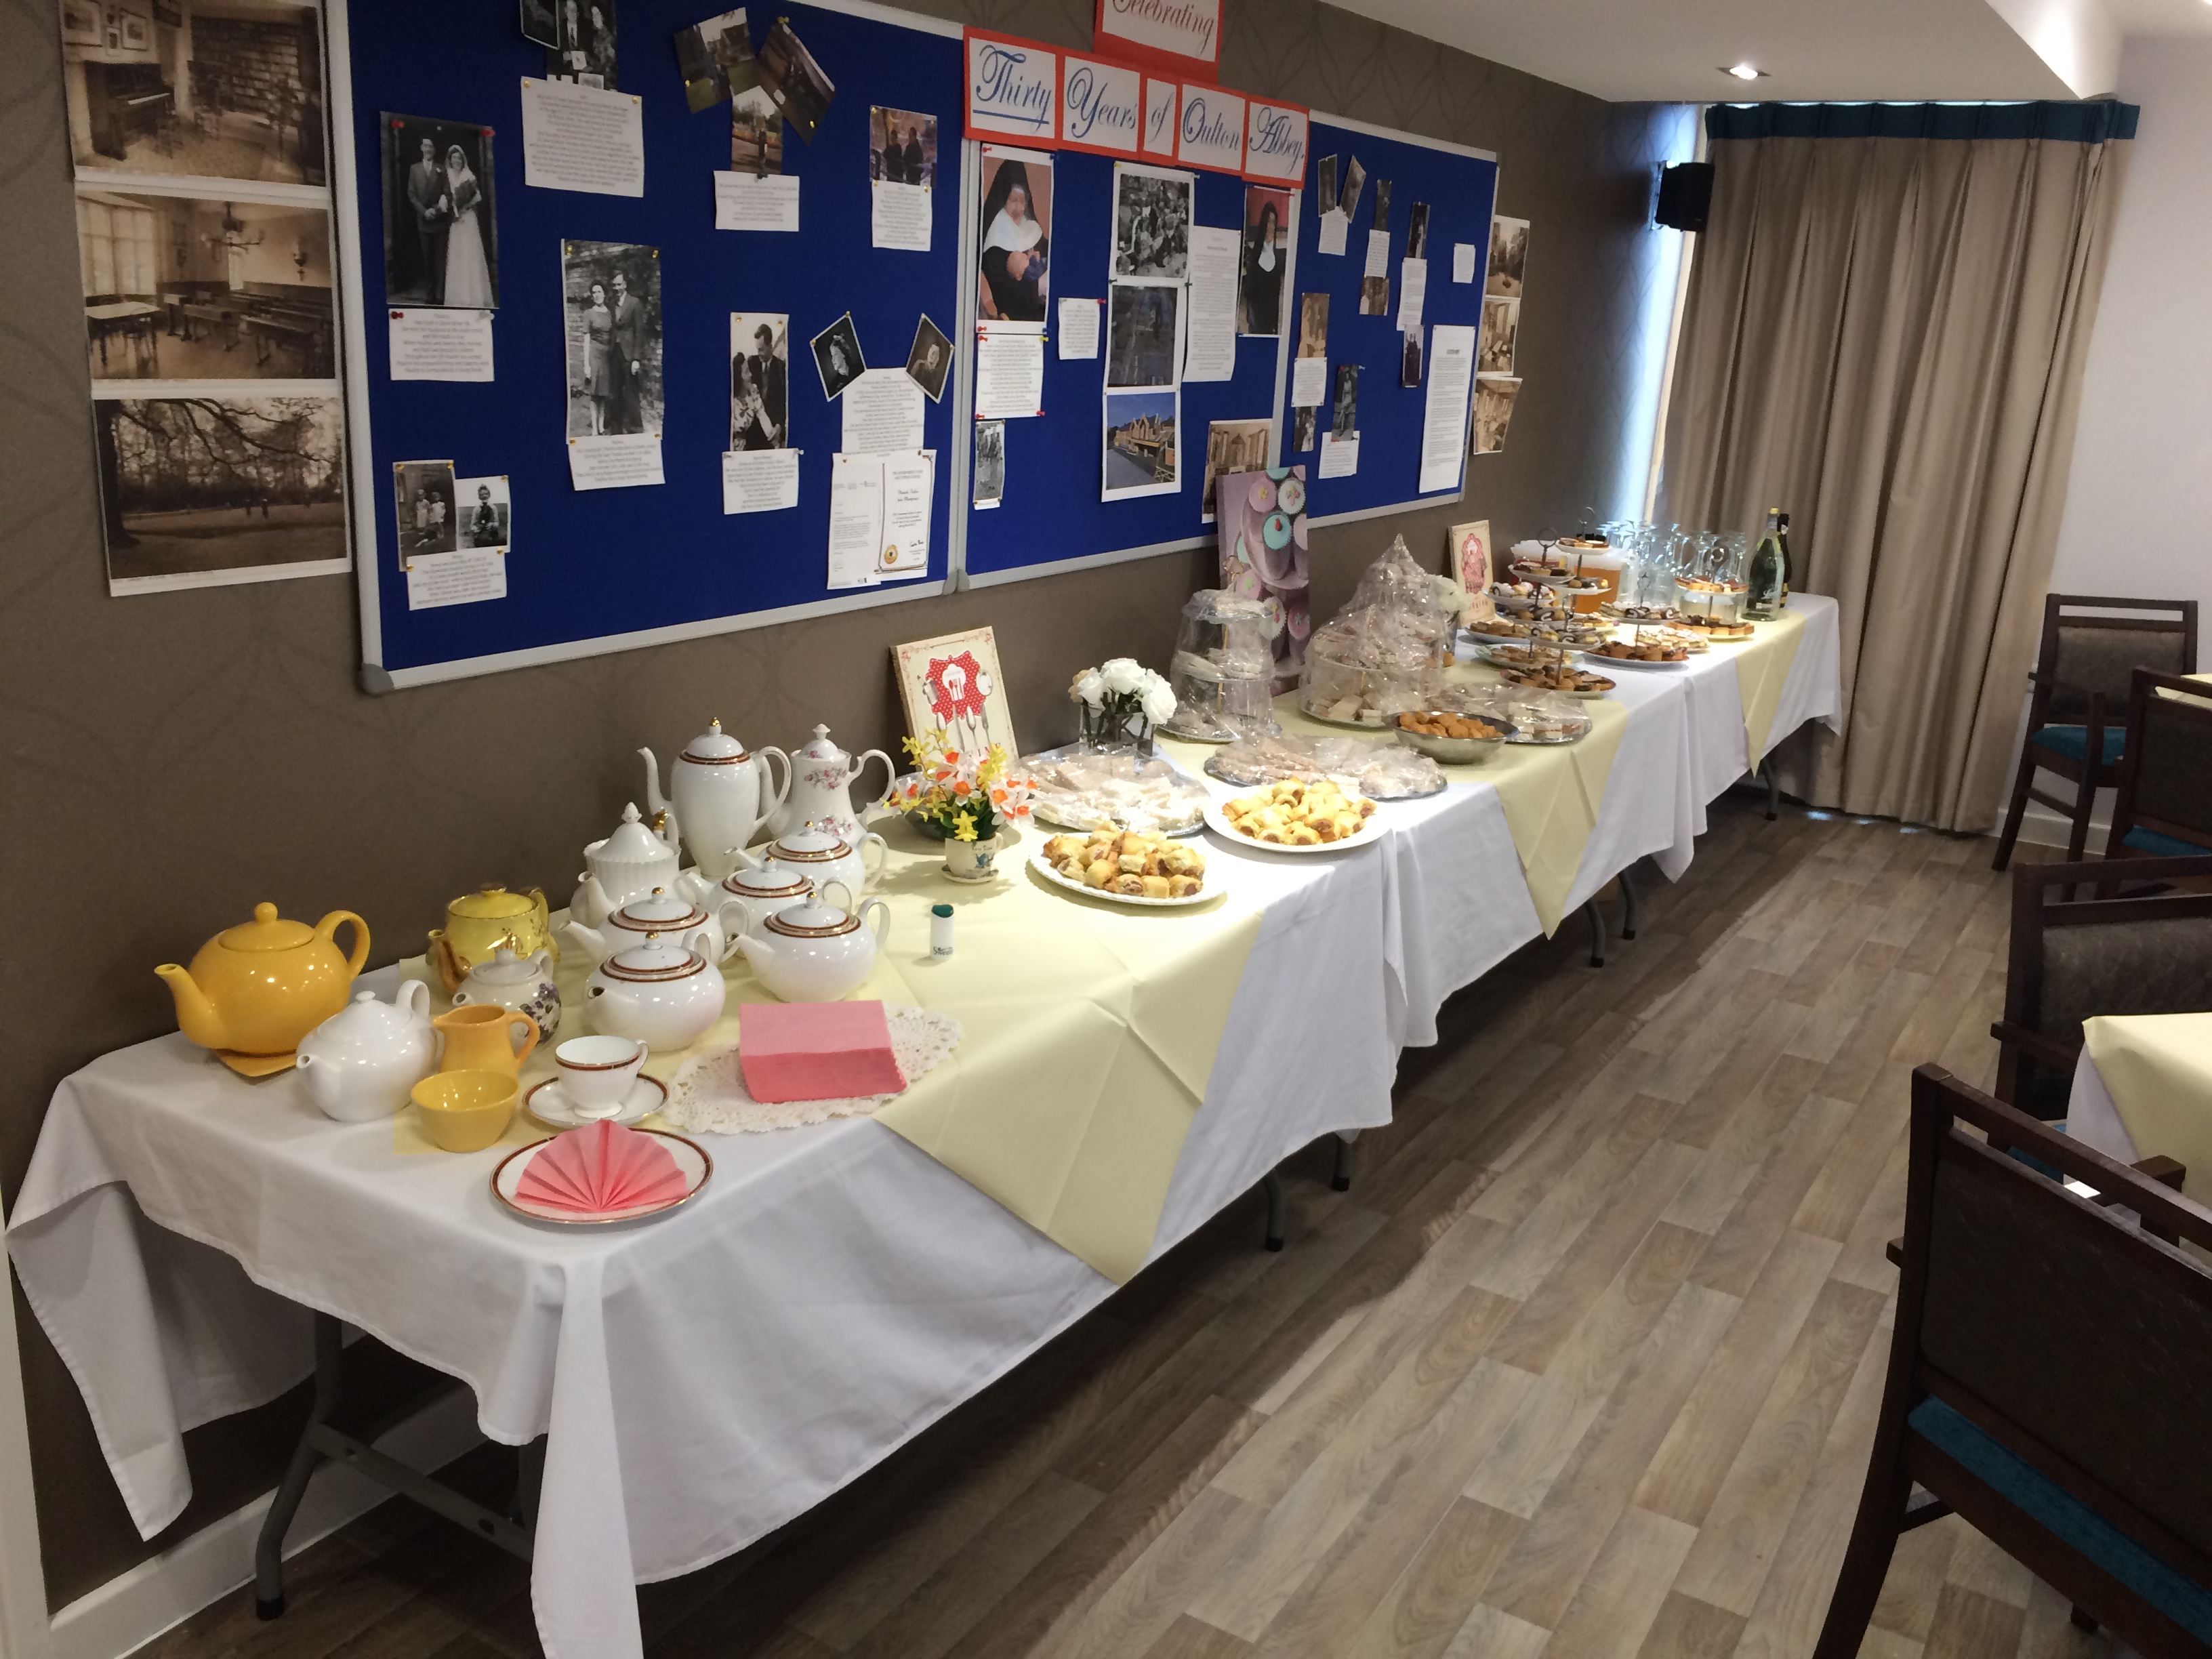 Afternoon Tea for our residents and their families